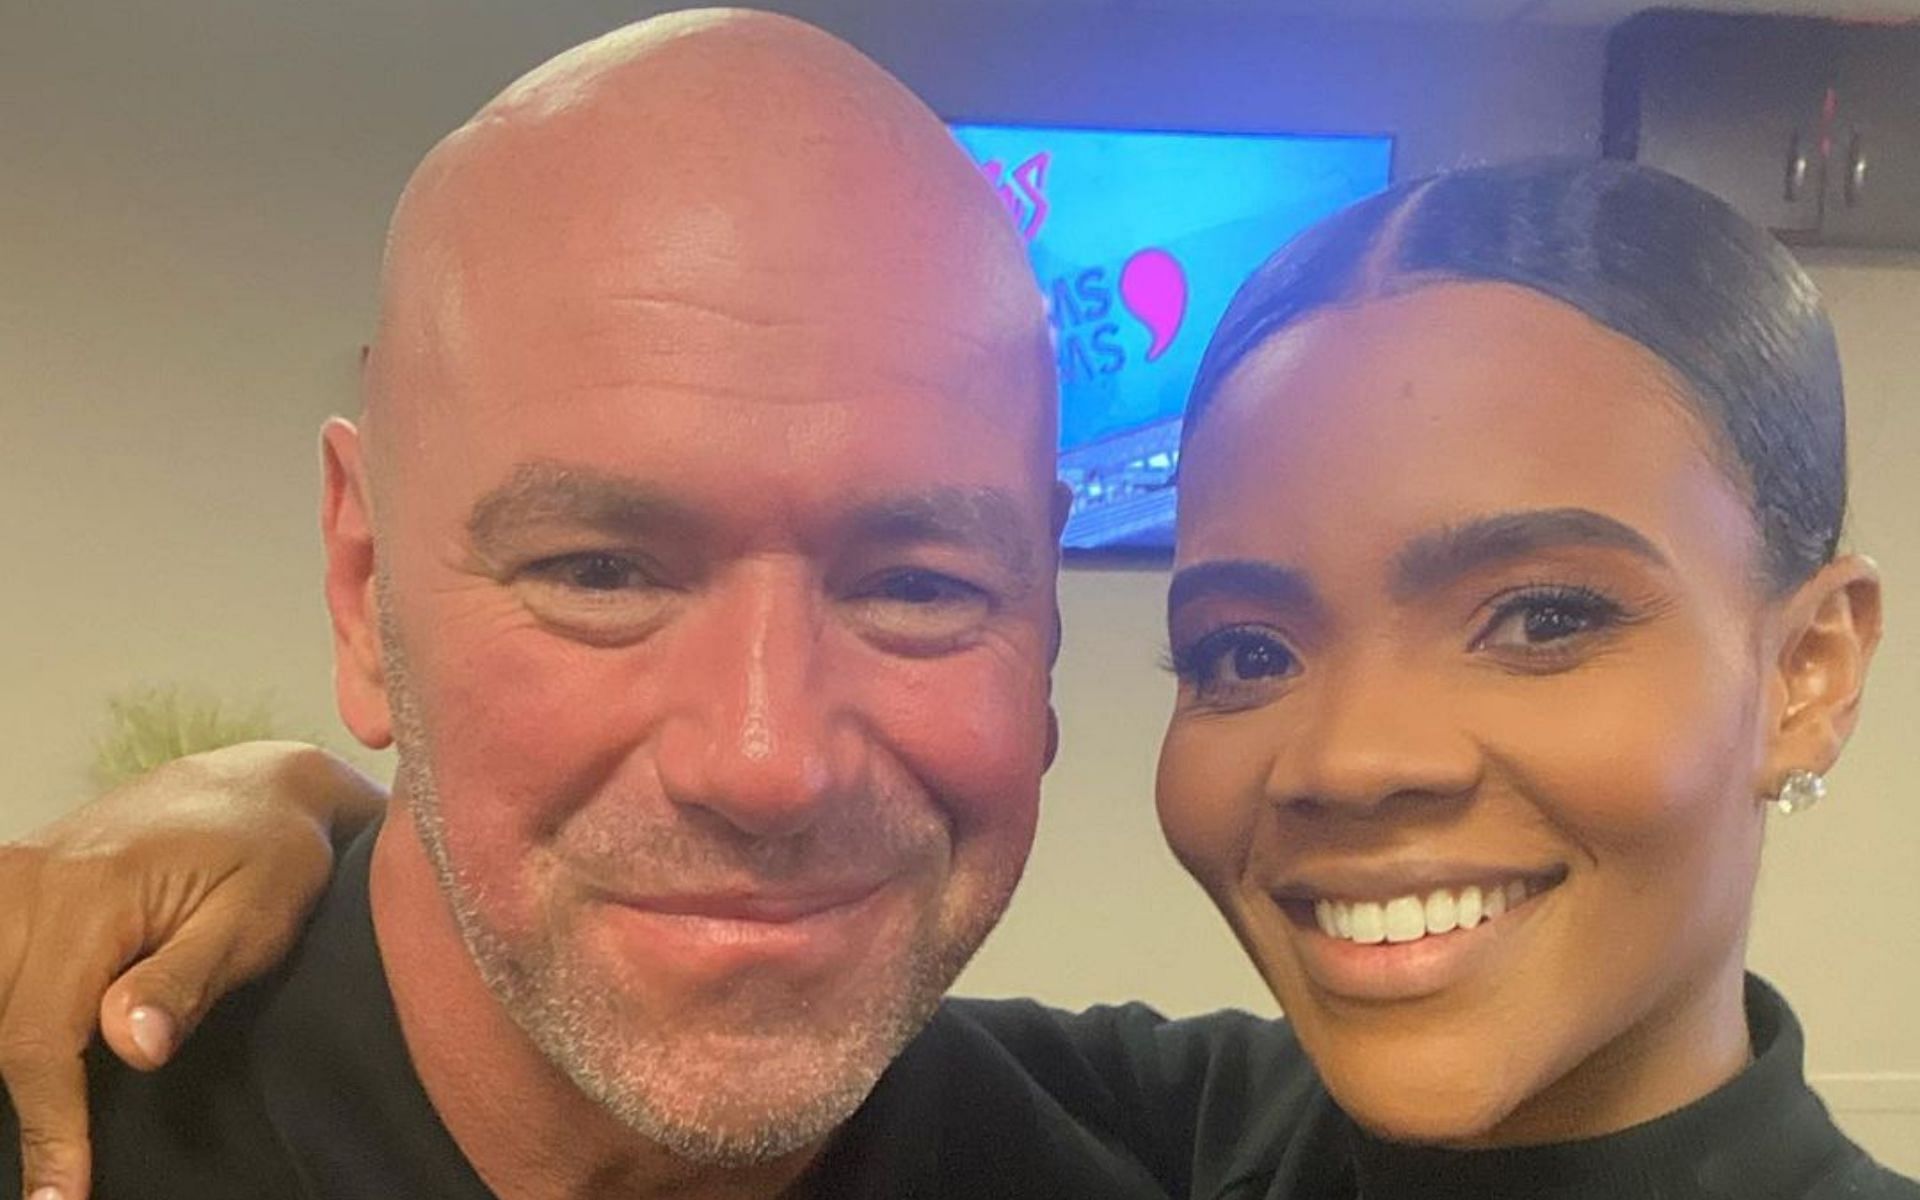 Dana White (left) is praised by Candace Owens (right) for his loyalty to Joe Rogan [Image via: @realcandaceowens on Instagram]